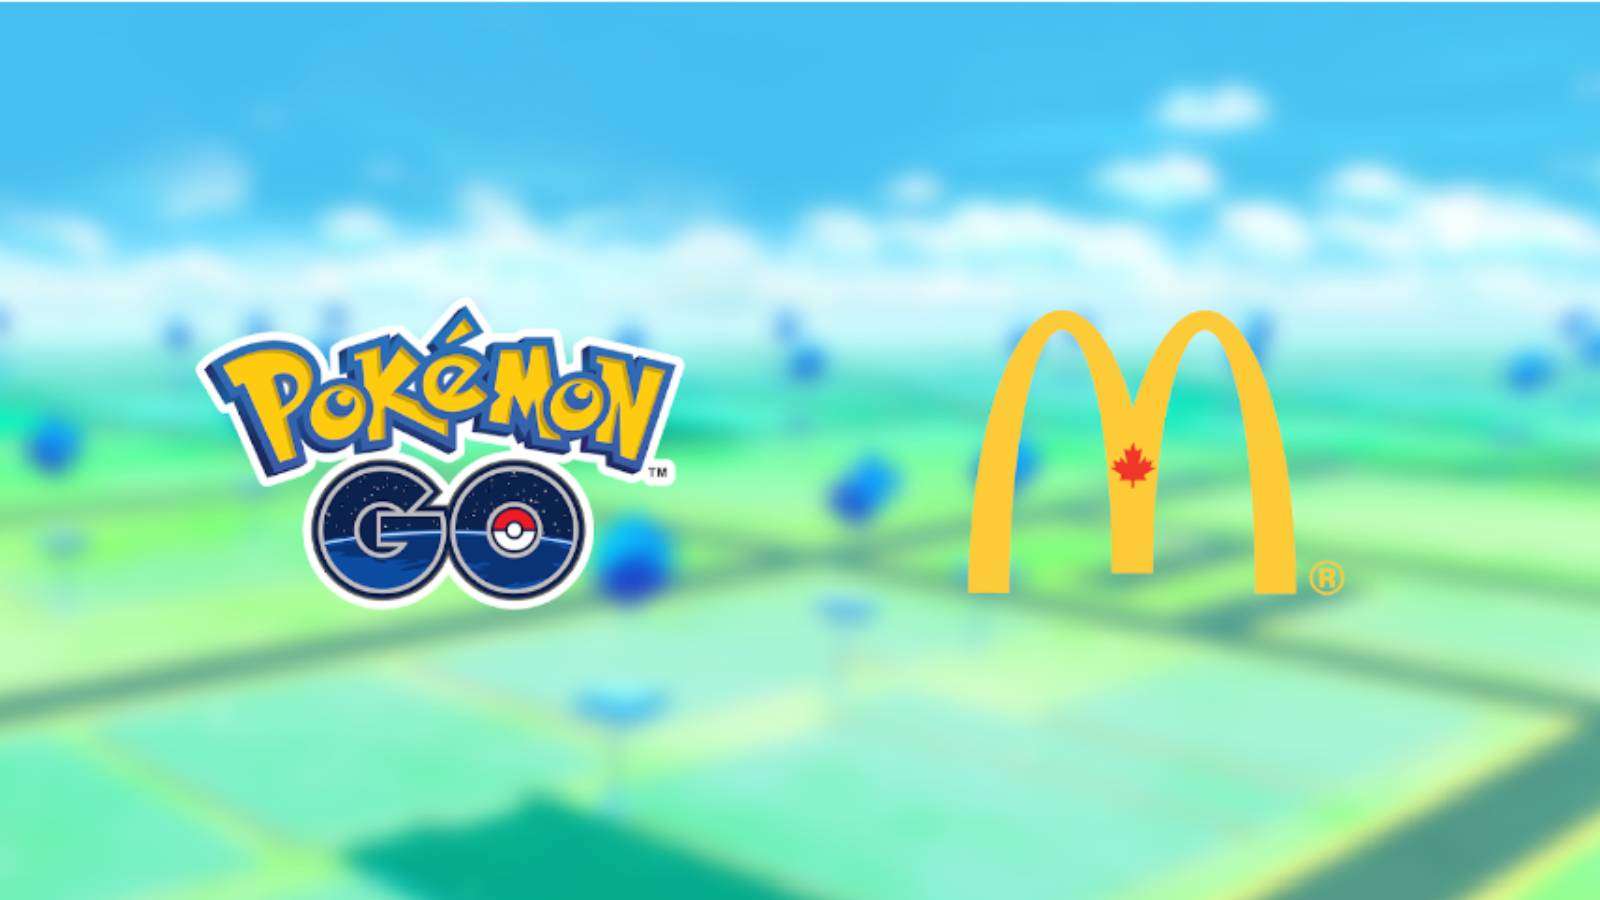 The Pokemon Go logo and the McDonalds symbol appear against a blurred background